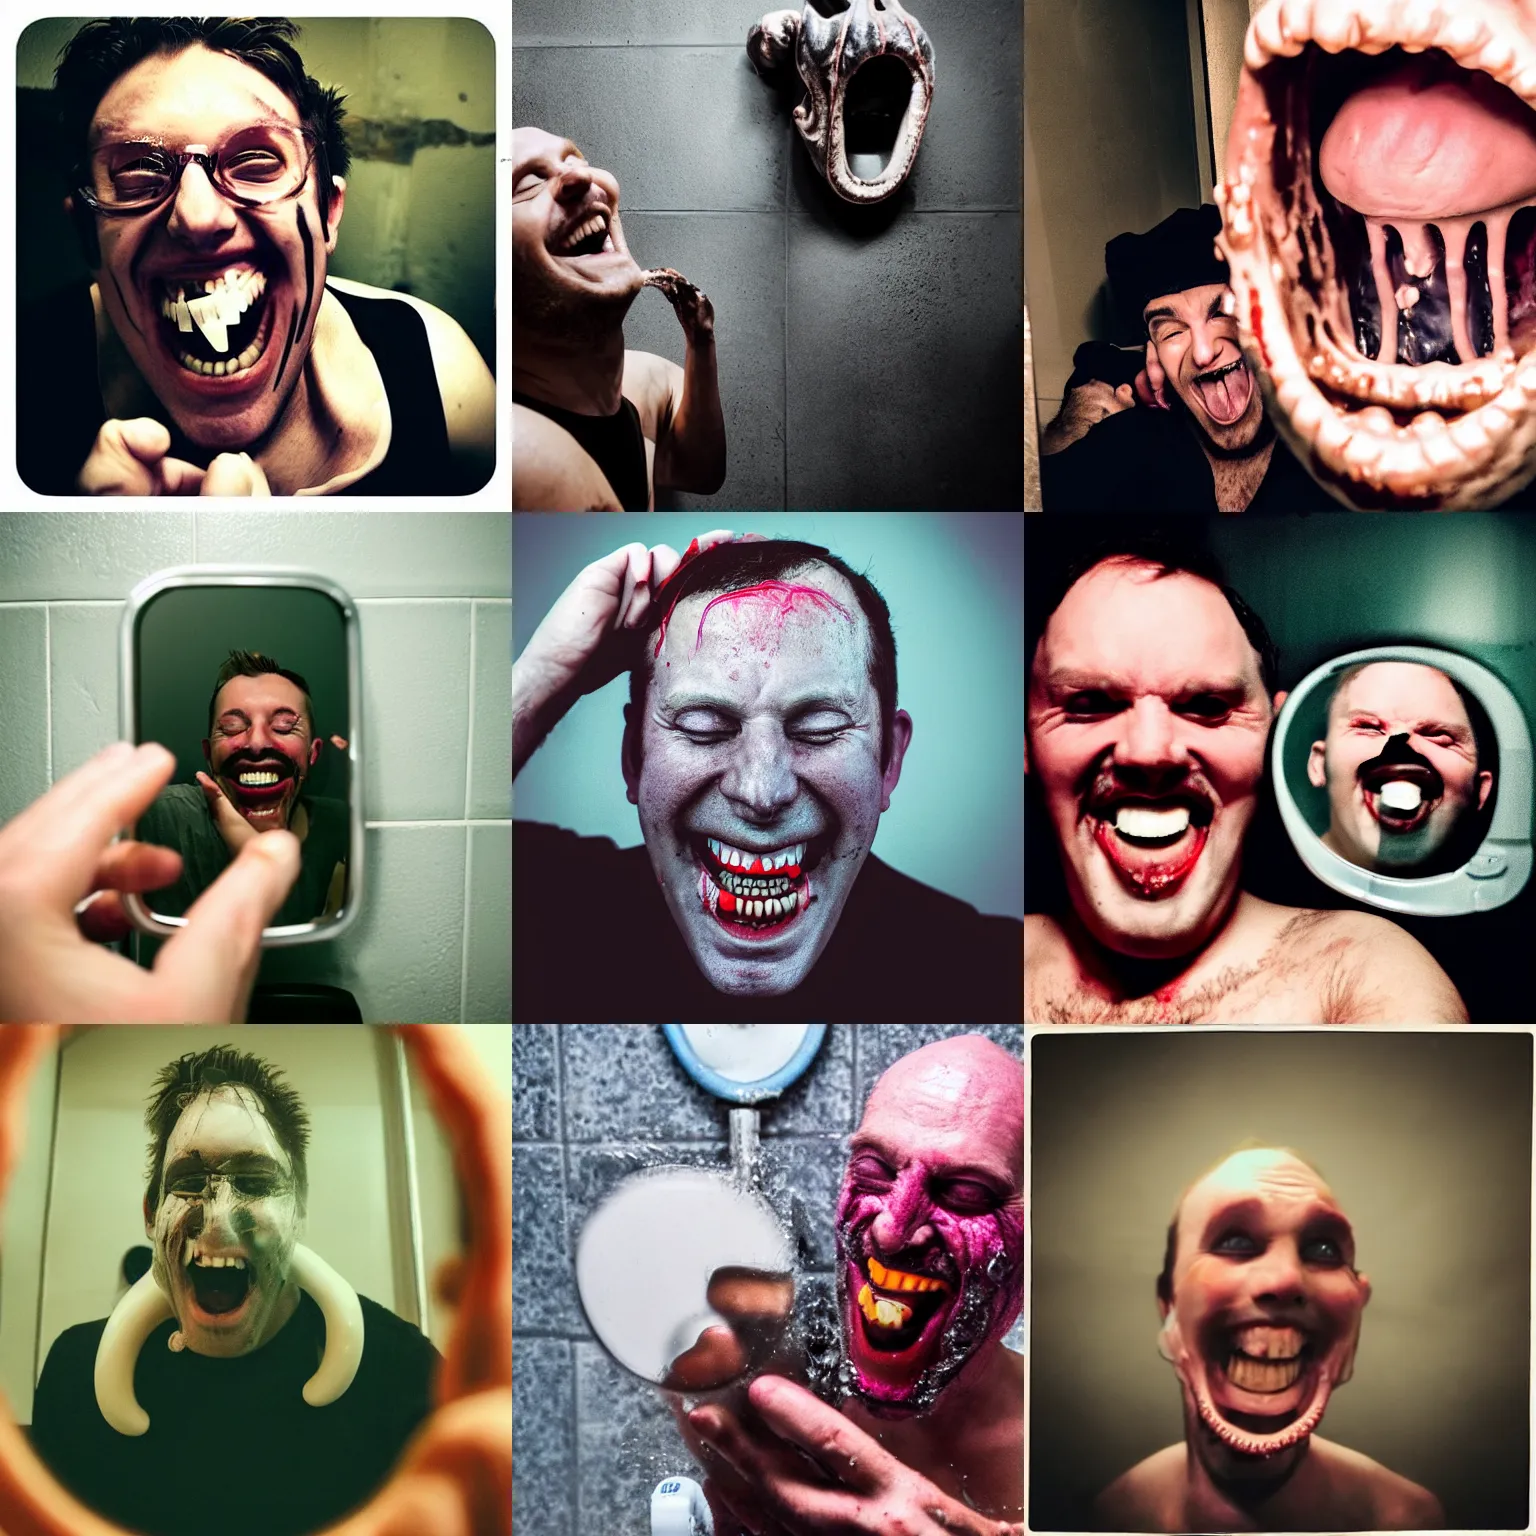 Prompt: tinder profile photo of a man with a melting face photographed by a cellphone pointed at a dirty bathroom mirror. An evil tentacled entity hides behind the man laughing.